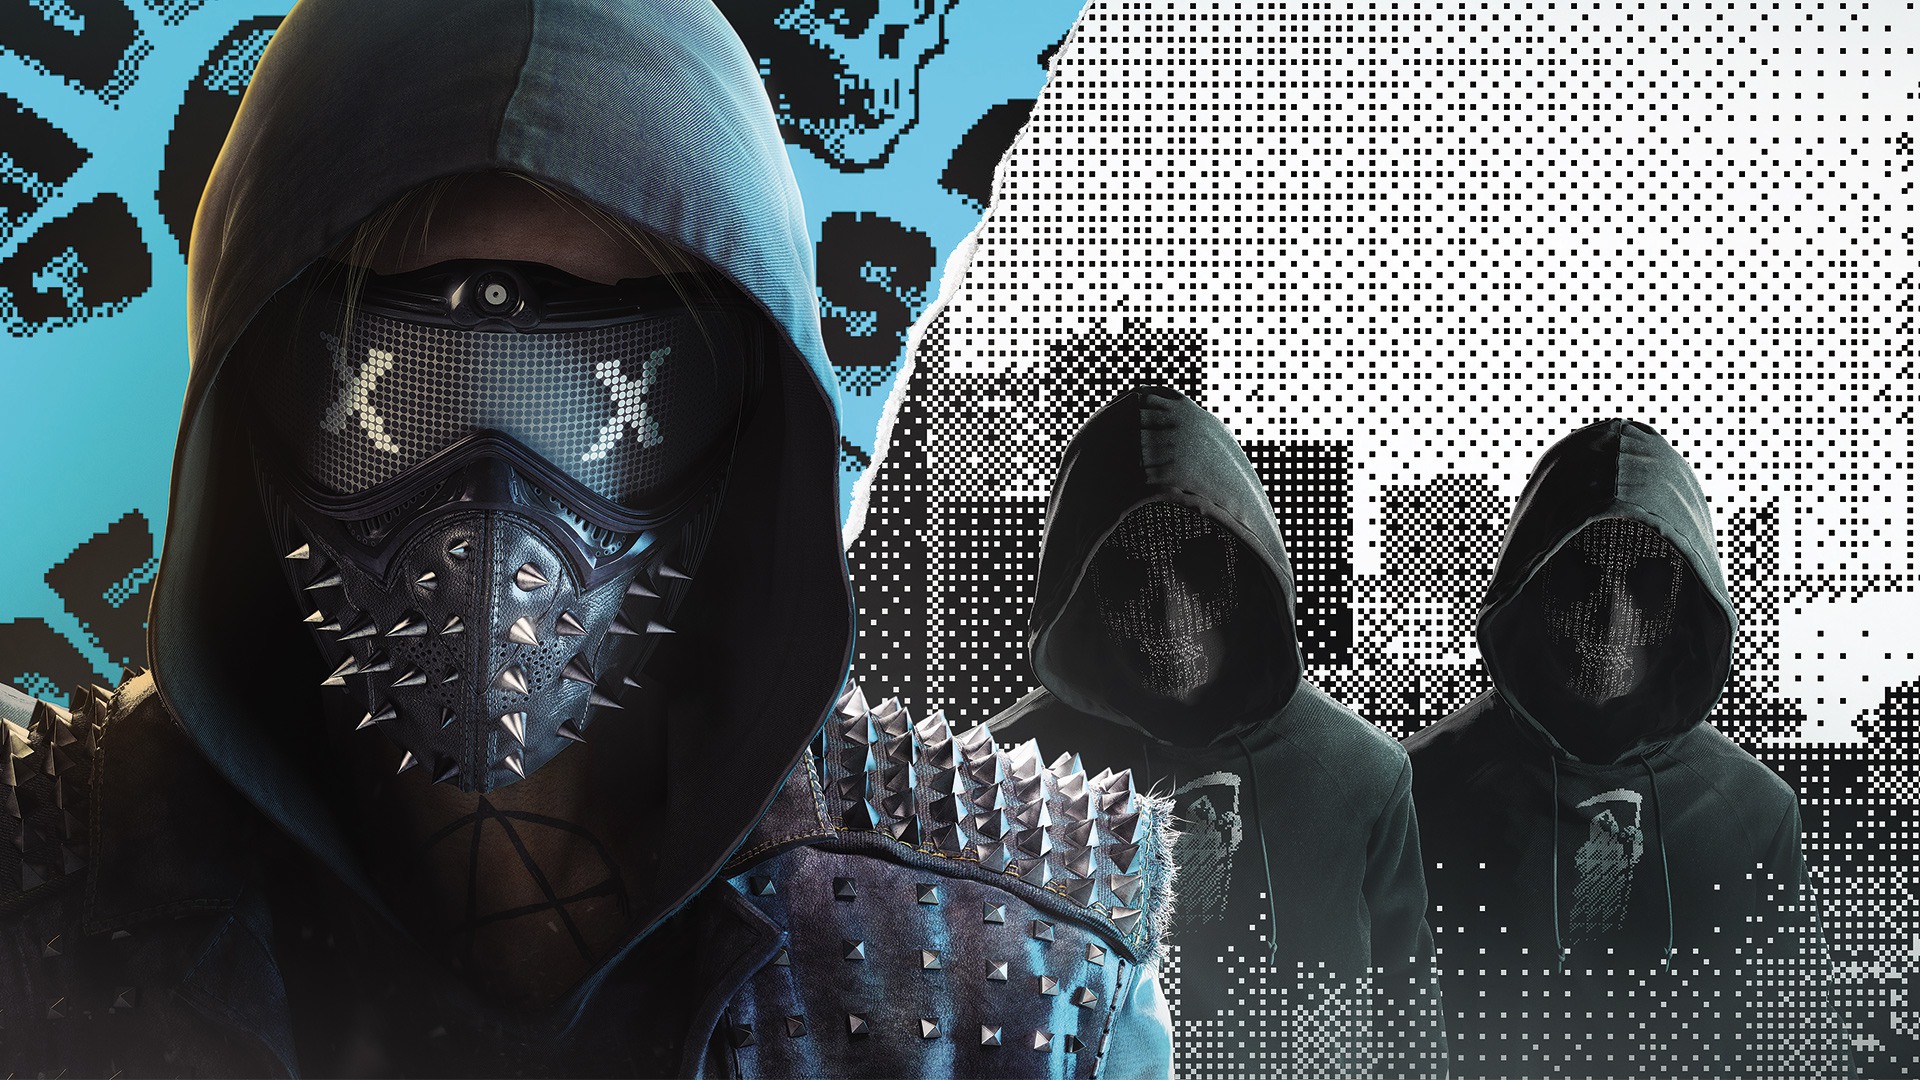 wrench (watch dogs), watch dogs 2, video game, watch dogs